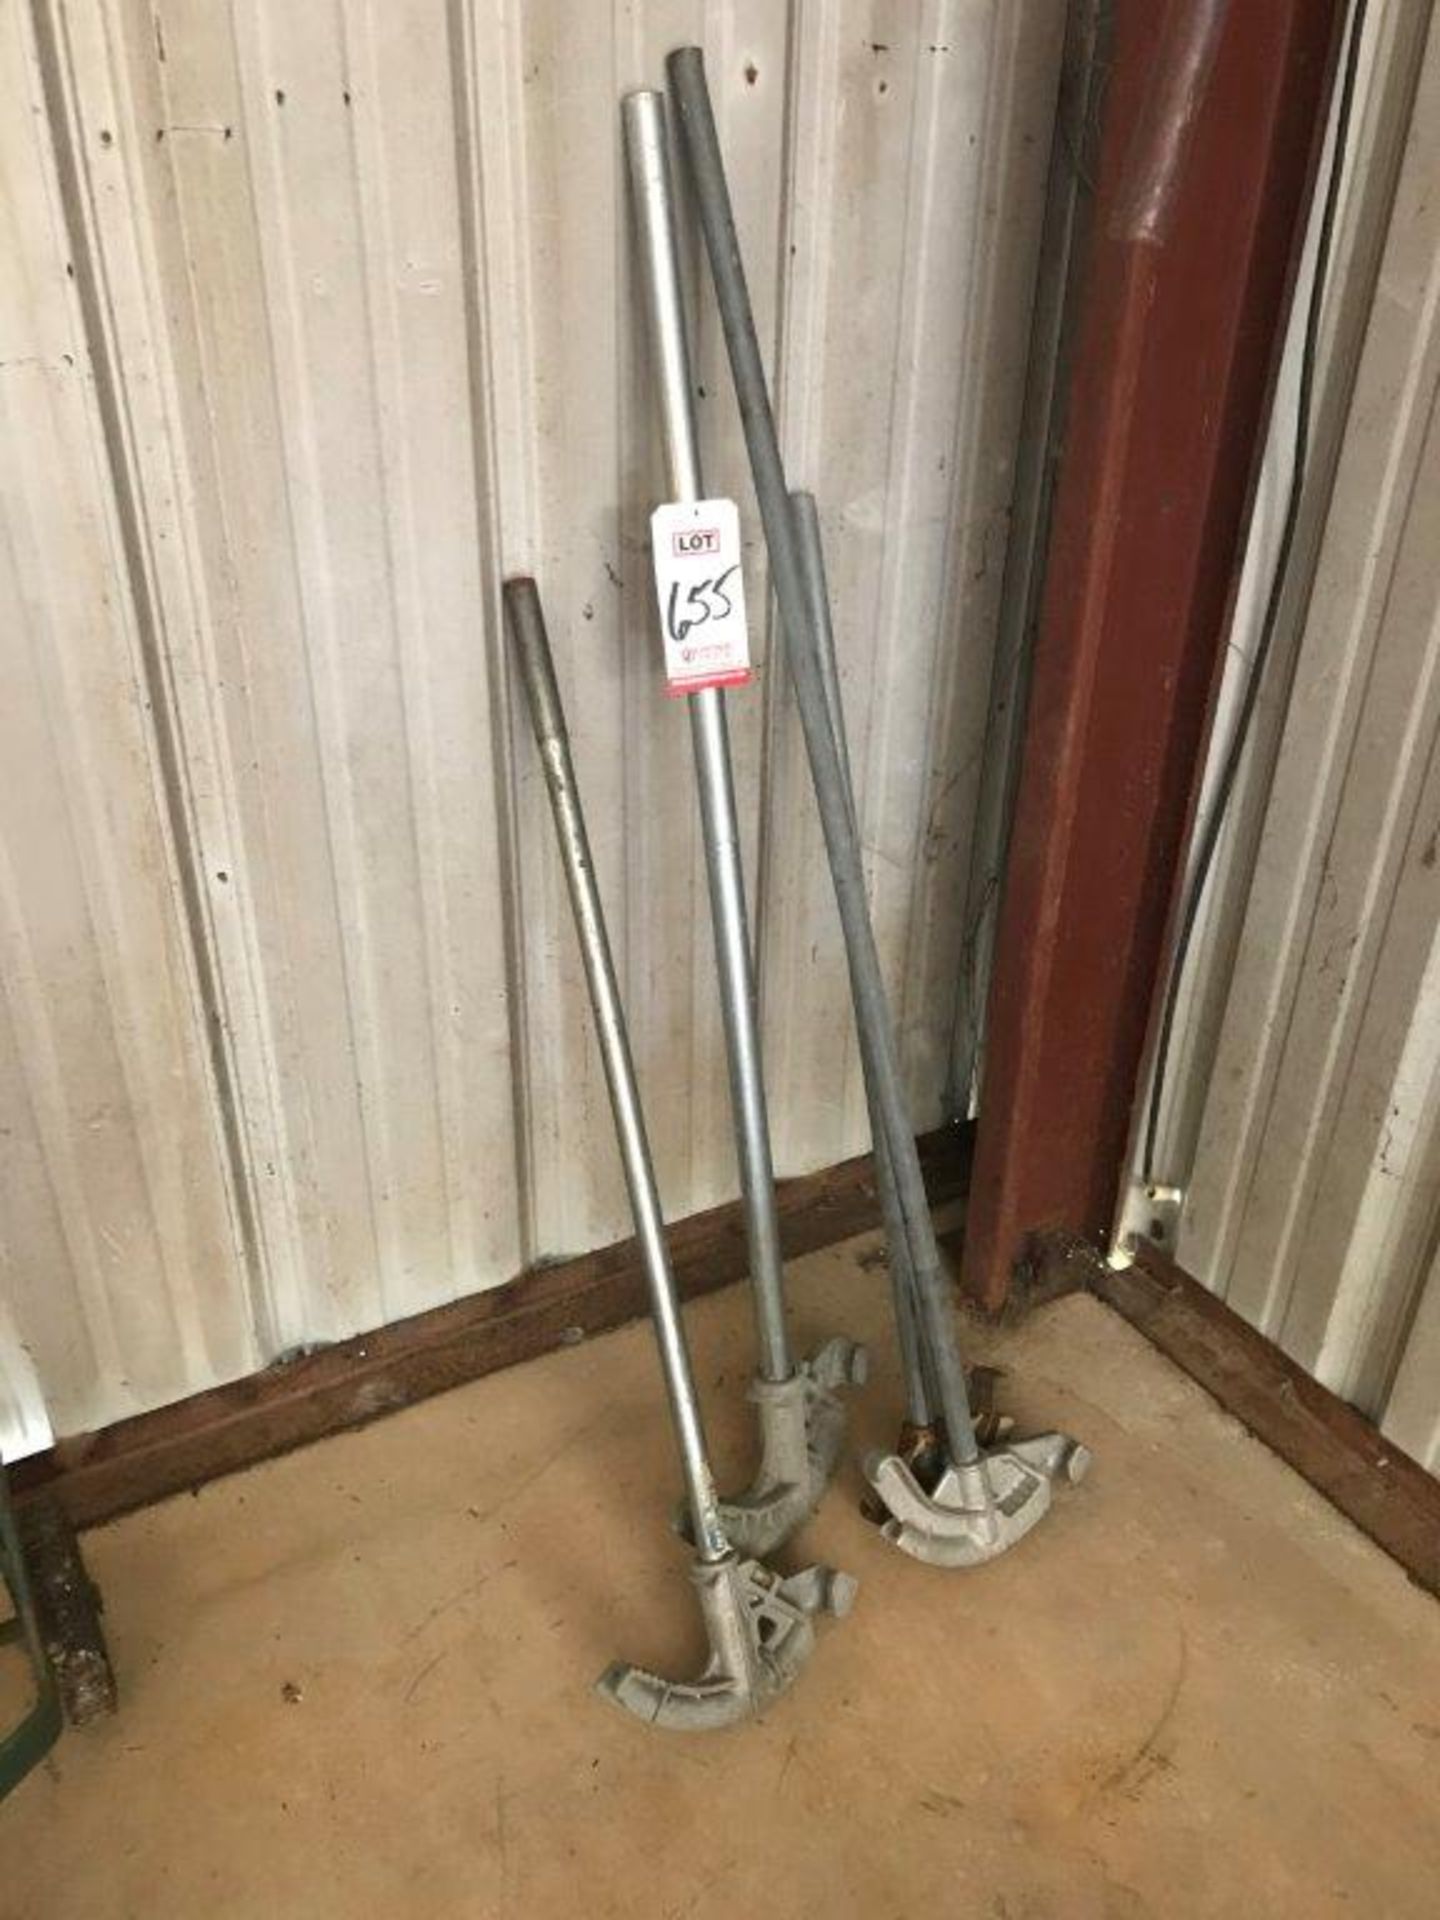 LOT - (4) MANUAL CONDUIT BENDERS, 1/2" TO 1" (LOCATION: BUILDING 10)